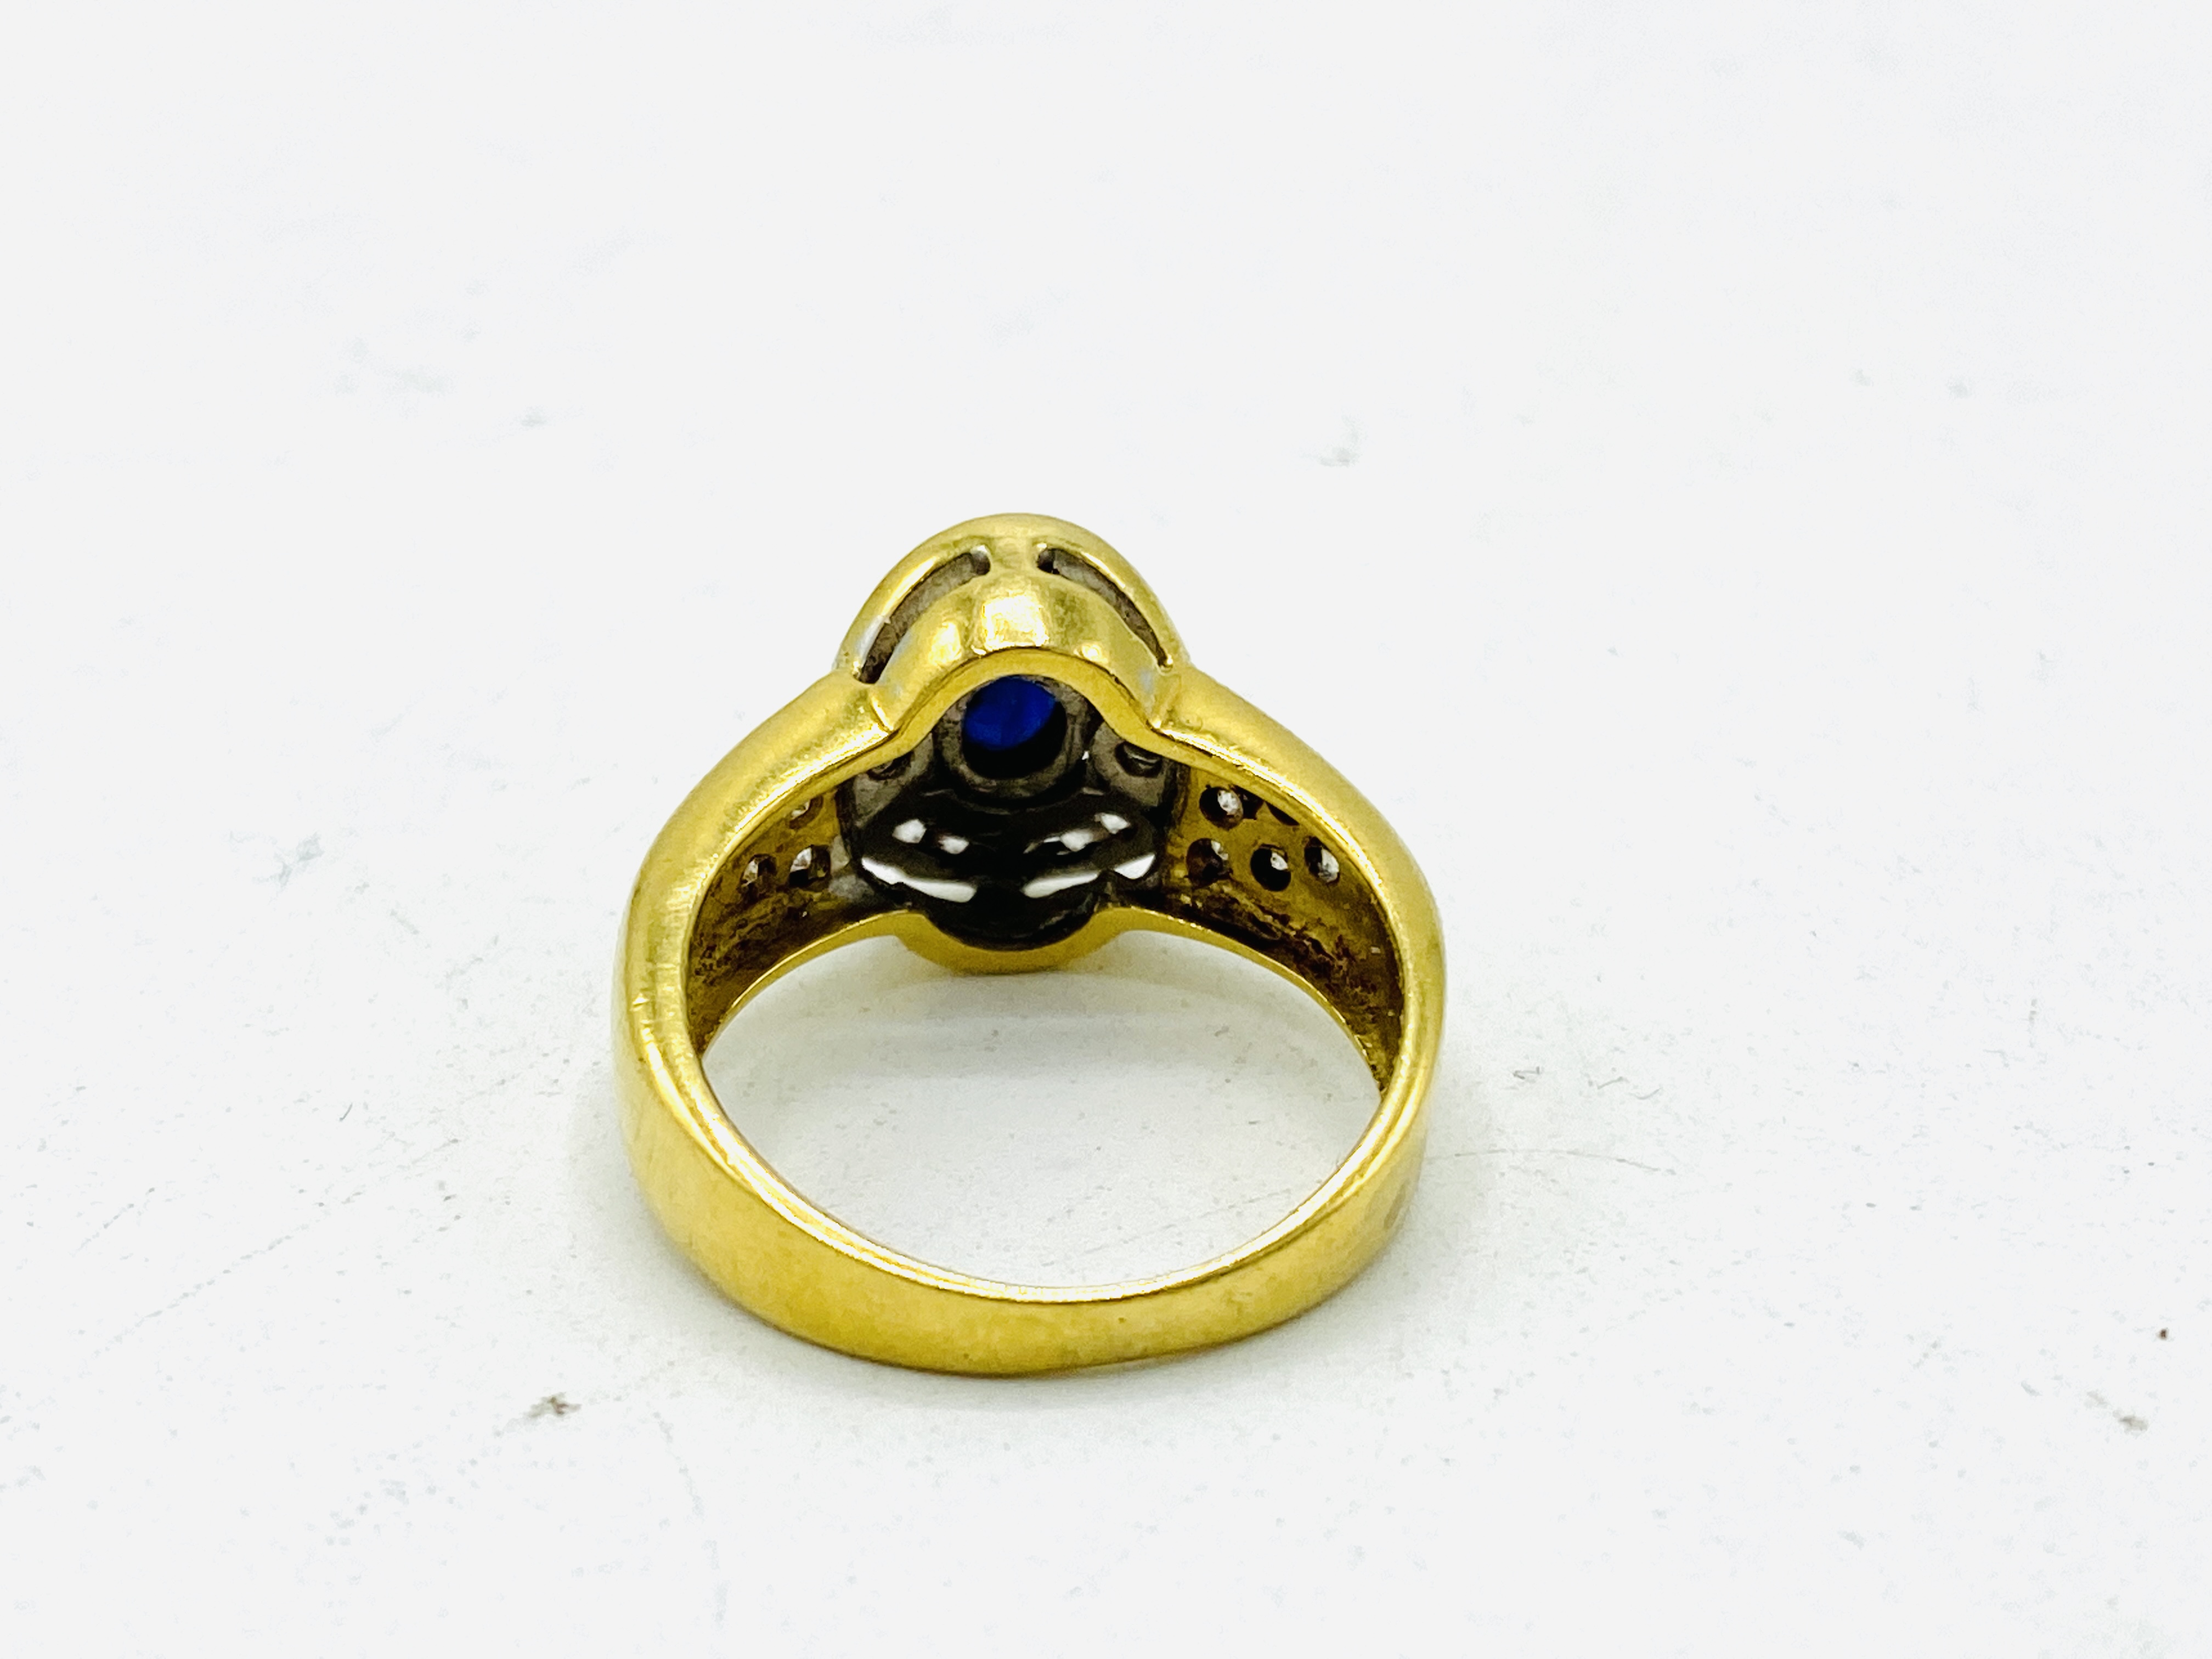 18ct gold, diamond and sapphire ring - Image 5 of 7